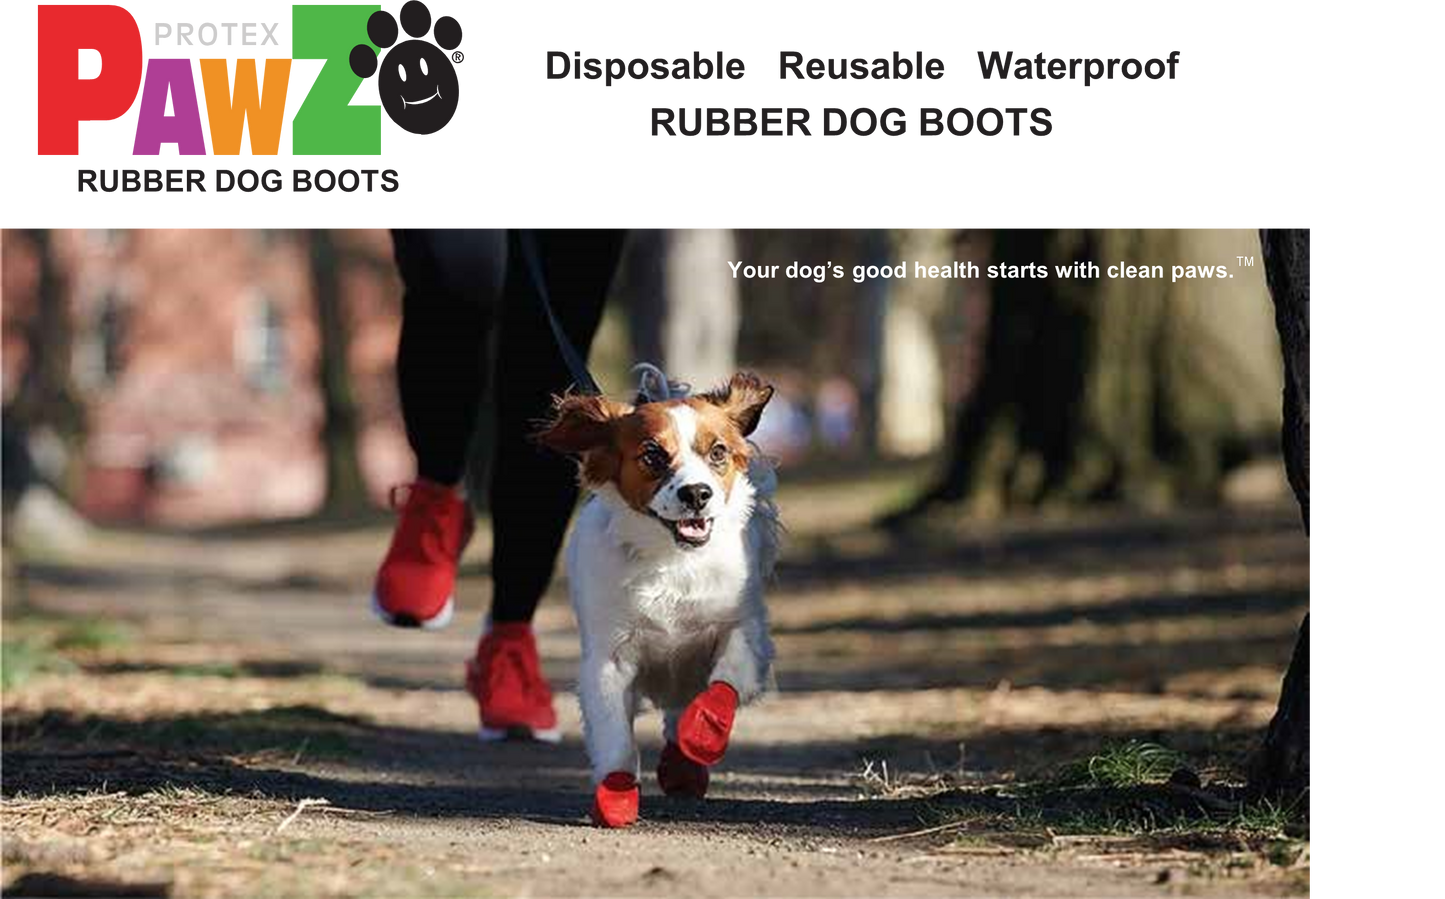 Pawz Waterproof dog boots - Lake Dog and their people